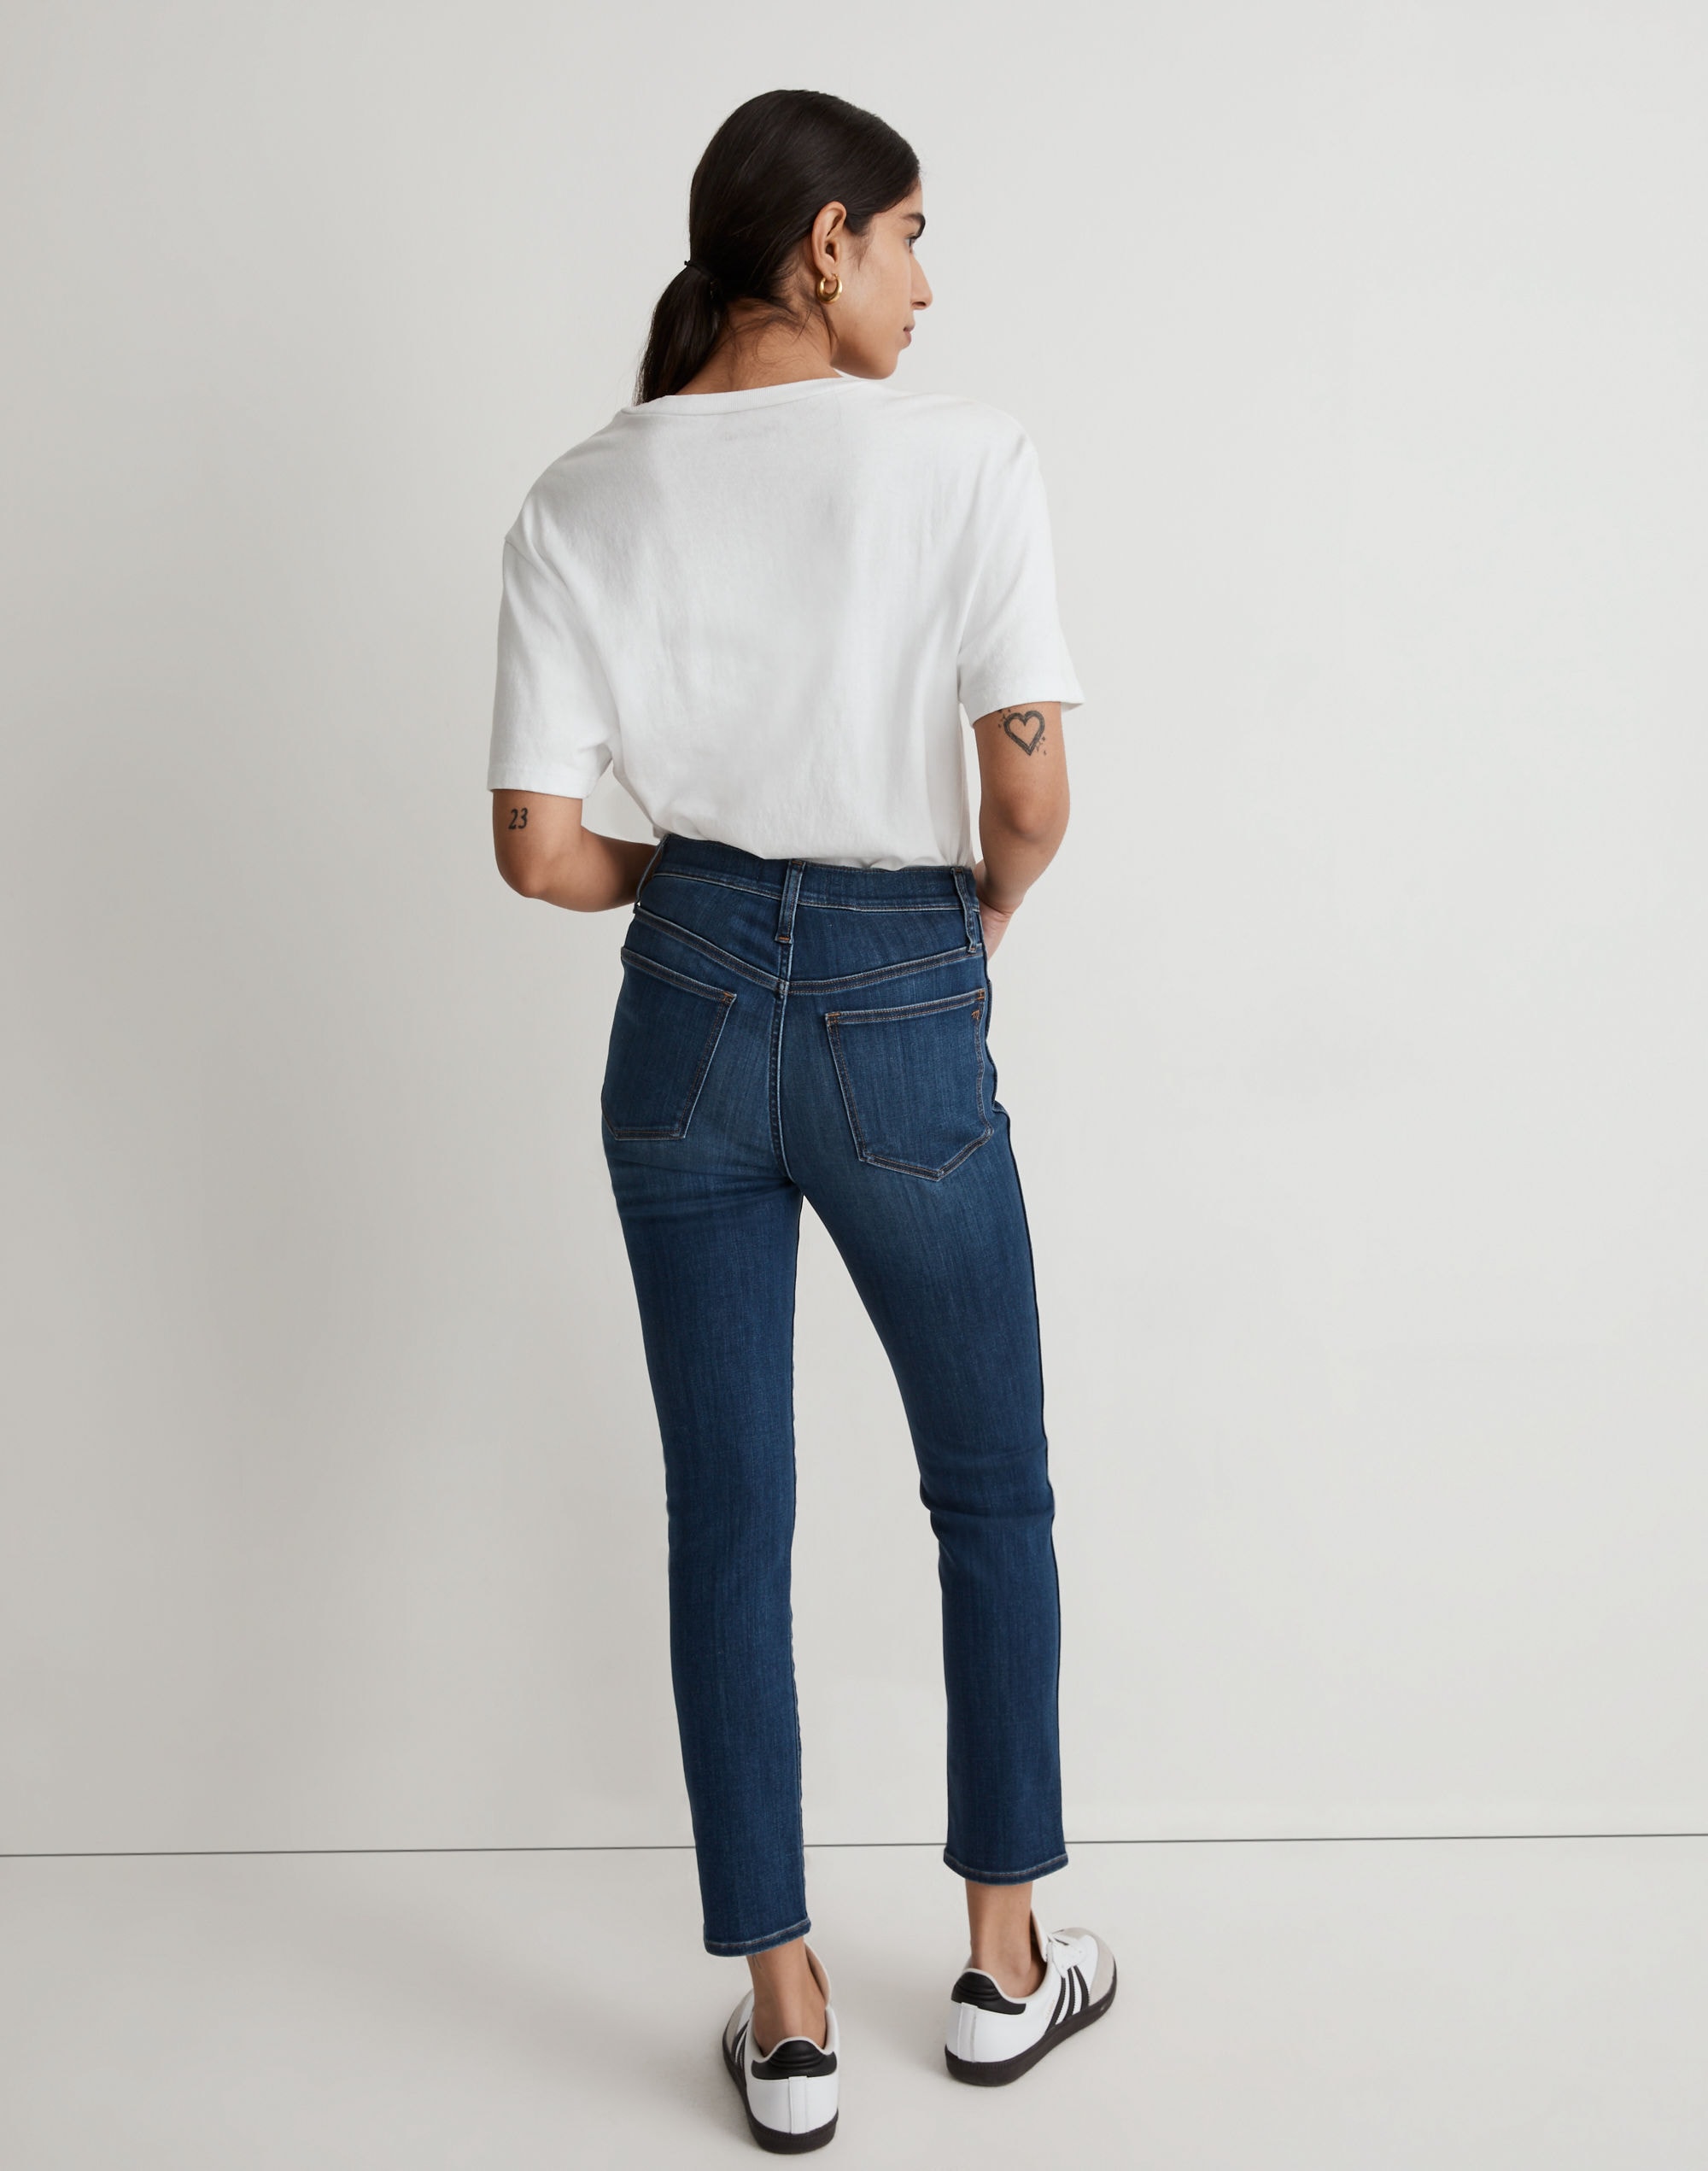 Tall Stovepipe Jeans in Brentside Wash